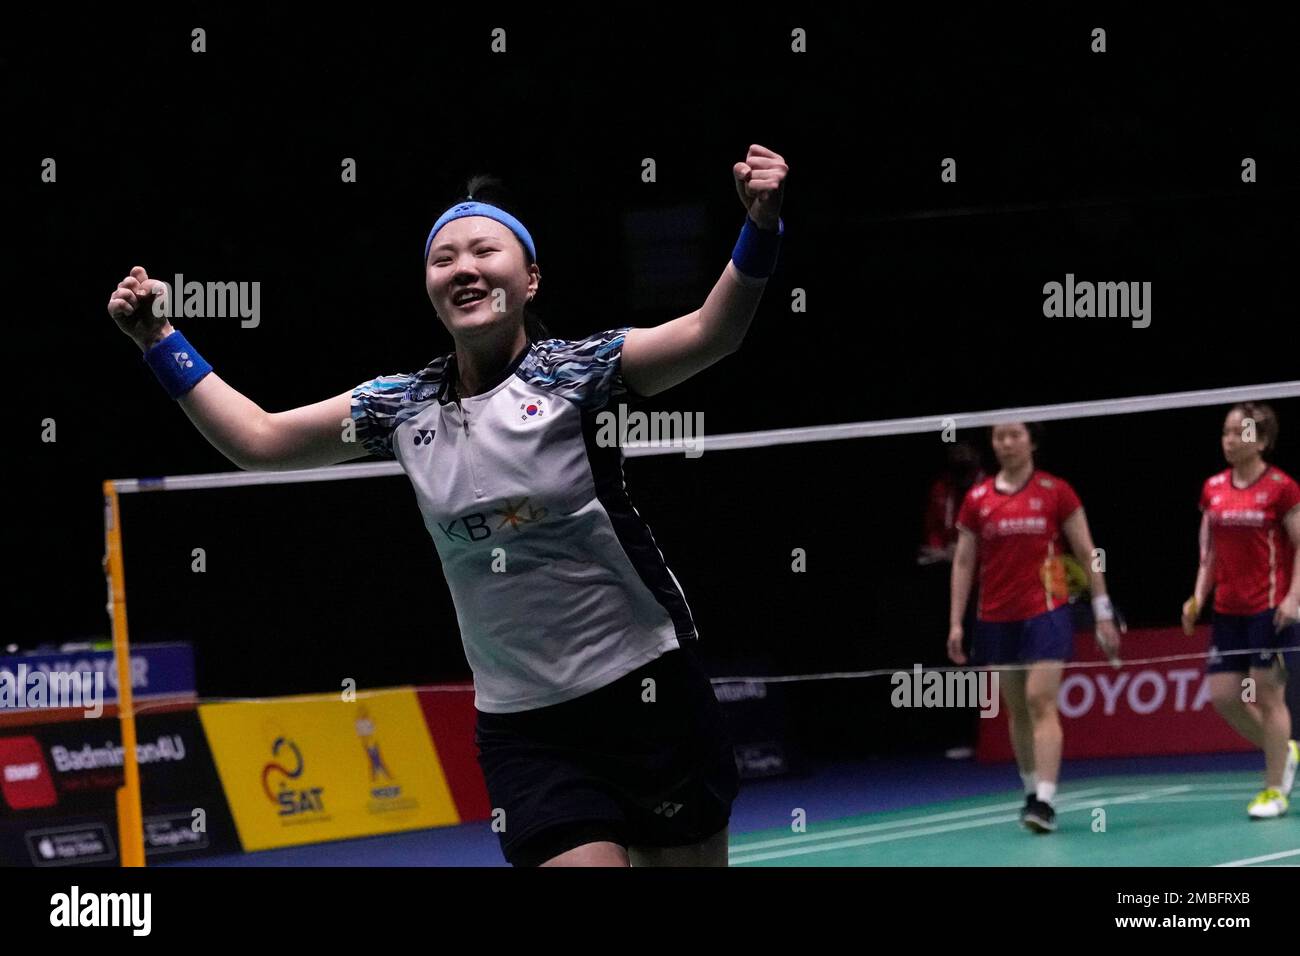 South Koreas Shin Seung-chan, left, reacts after winning over Chinas Jia Yi Fan, and Chen Qing Chen during their womens double final badminton match at Thomas and Uber Cup in Bangkok, Thailand,